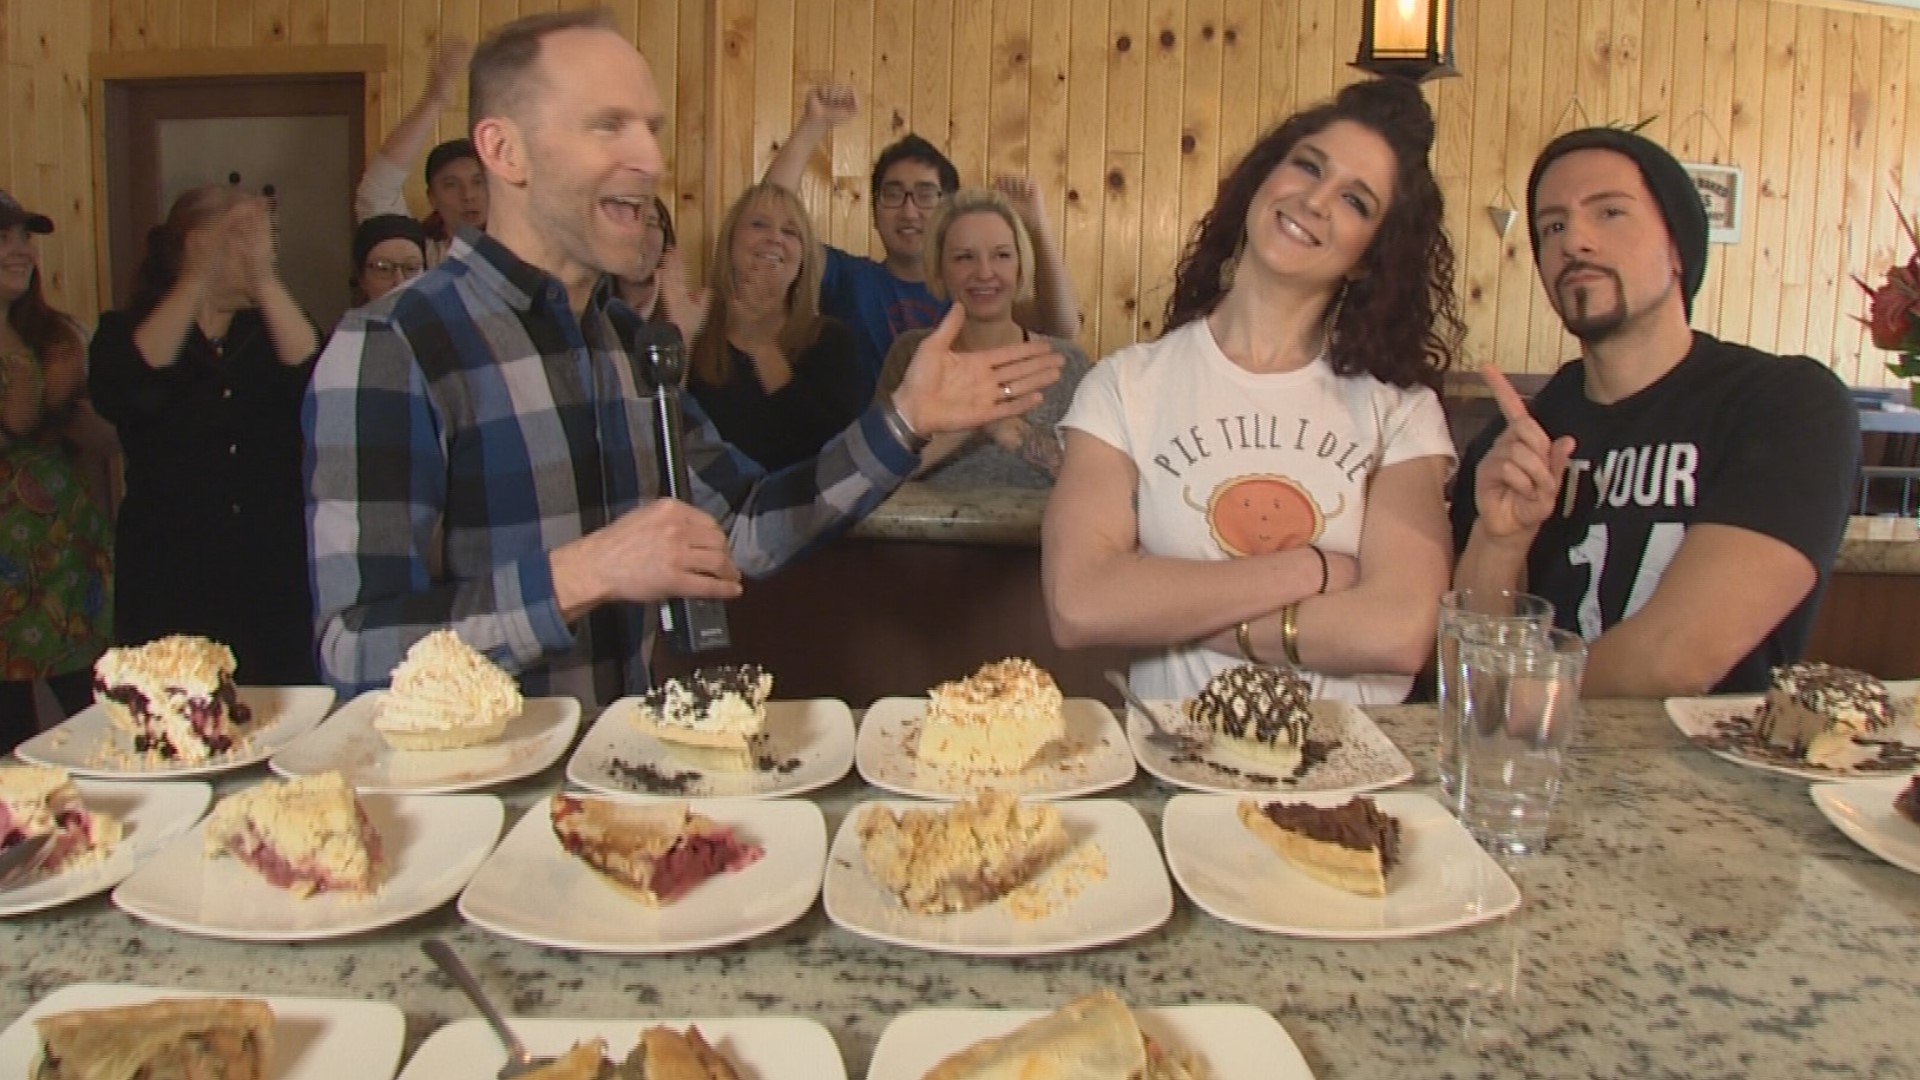 Competitive eating couple wows 'em on Pi Day at Pie Bar Ballard.